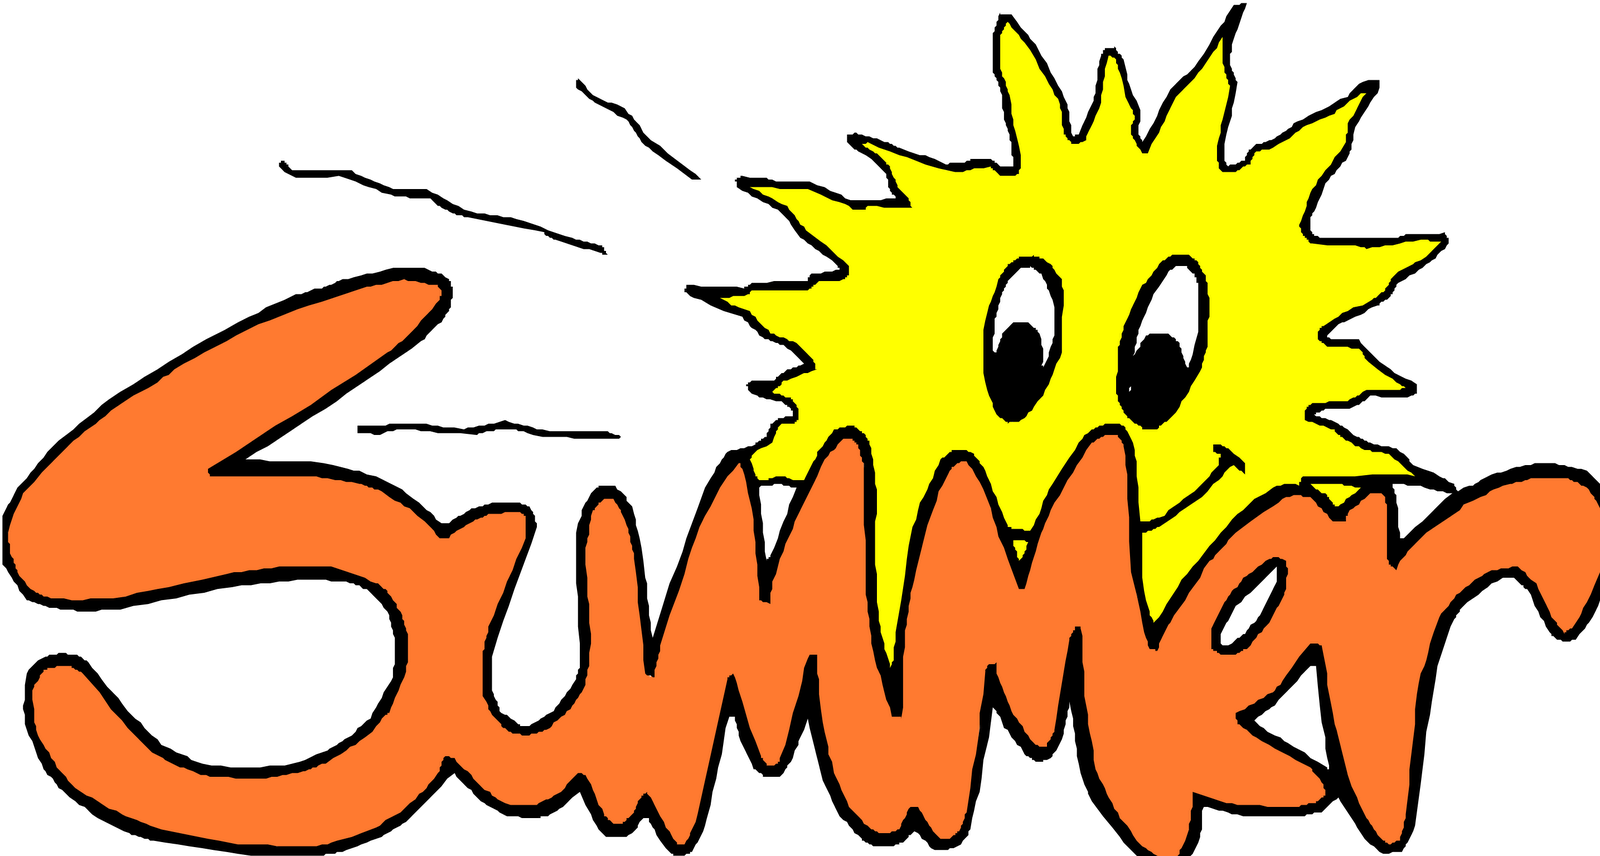 summer camp clipart images - photo #17